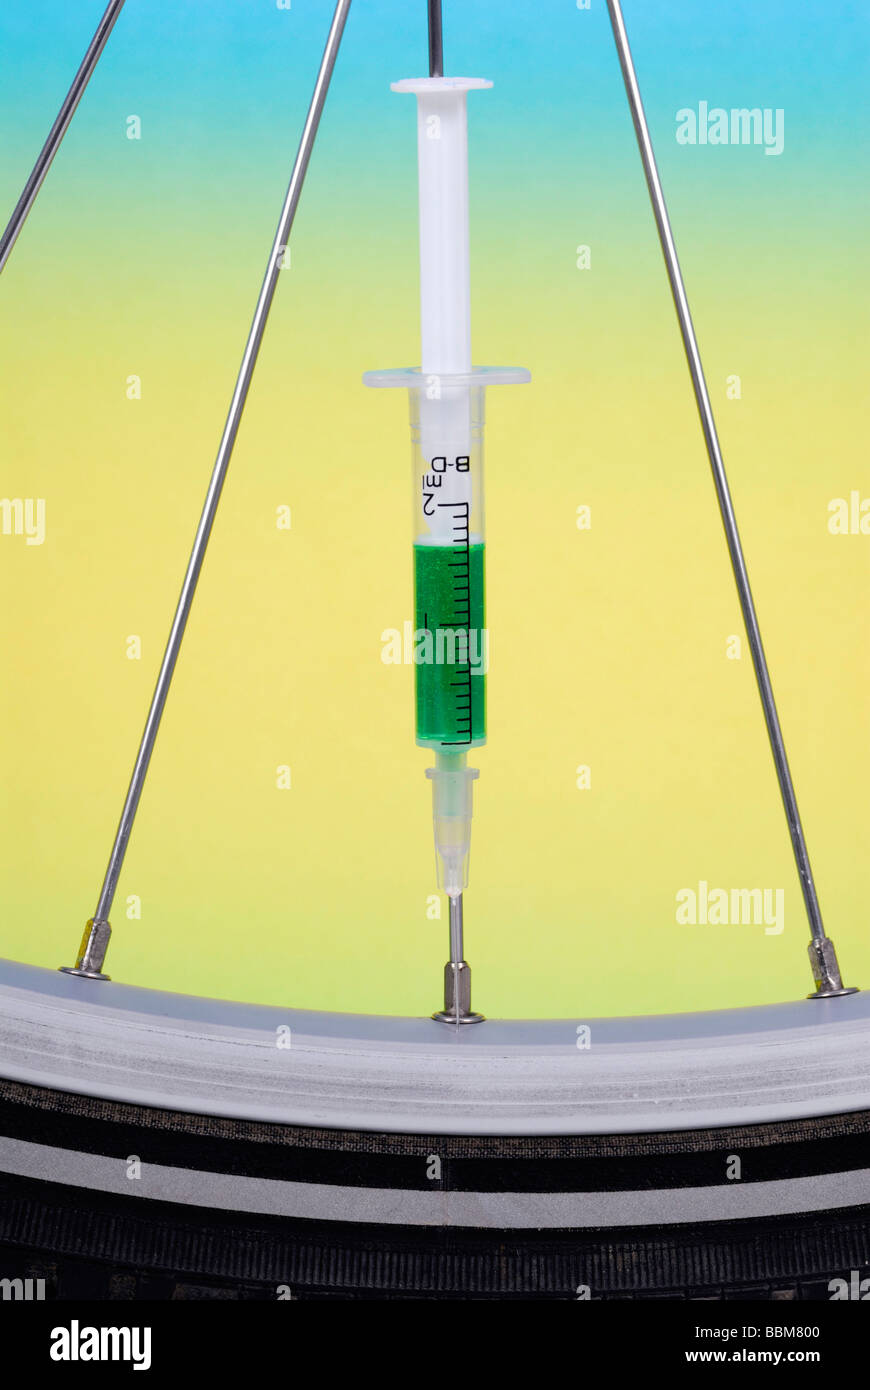 Injection needle in the spoke of a racing cycle tyre, symbolic picture for doping in cycling Stock Photo